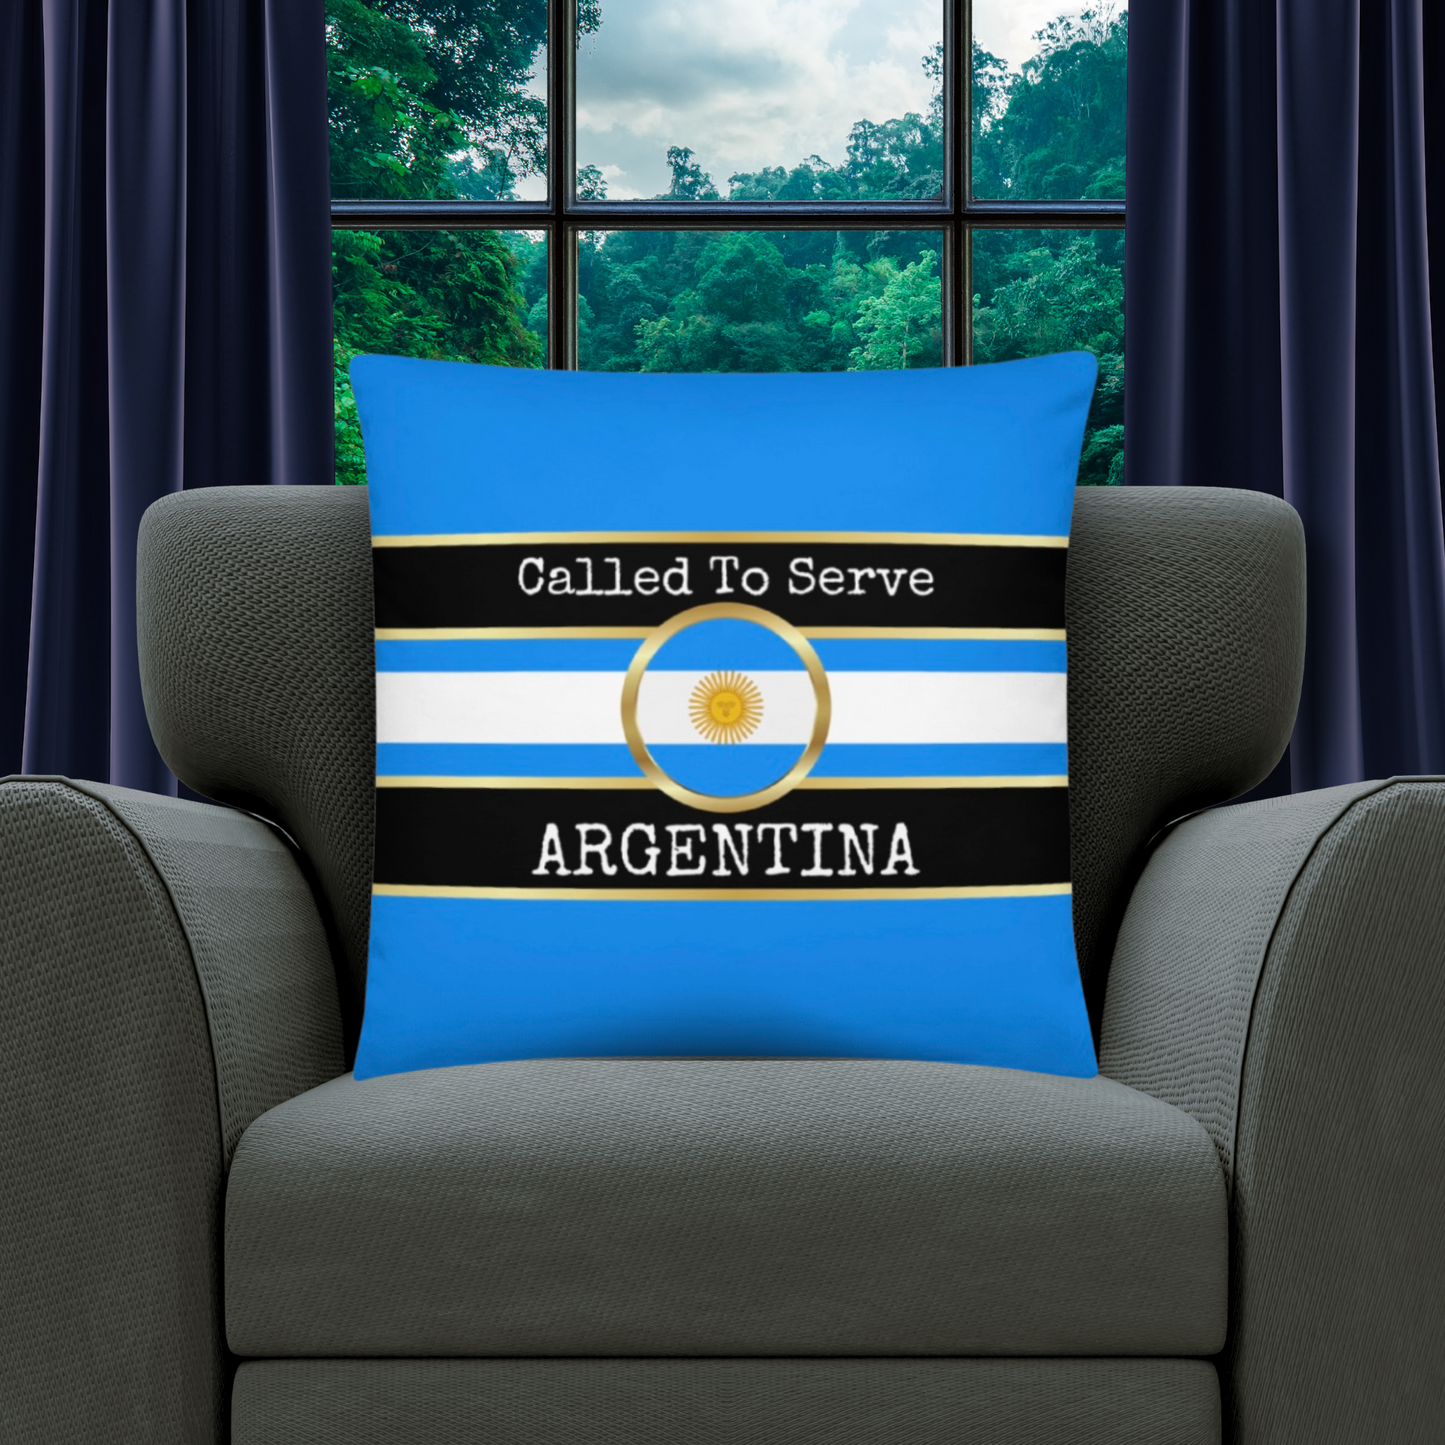 Argentina Missionary Gift #1 | Best Missionary Gift Ideas | Mission Call Gifts | Called to Serve Gifts | Missionary Mom Gifts | Best Latter Day Saint Gifts | LDS Missionary Gifts | Argentina Home Decor